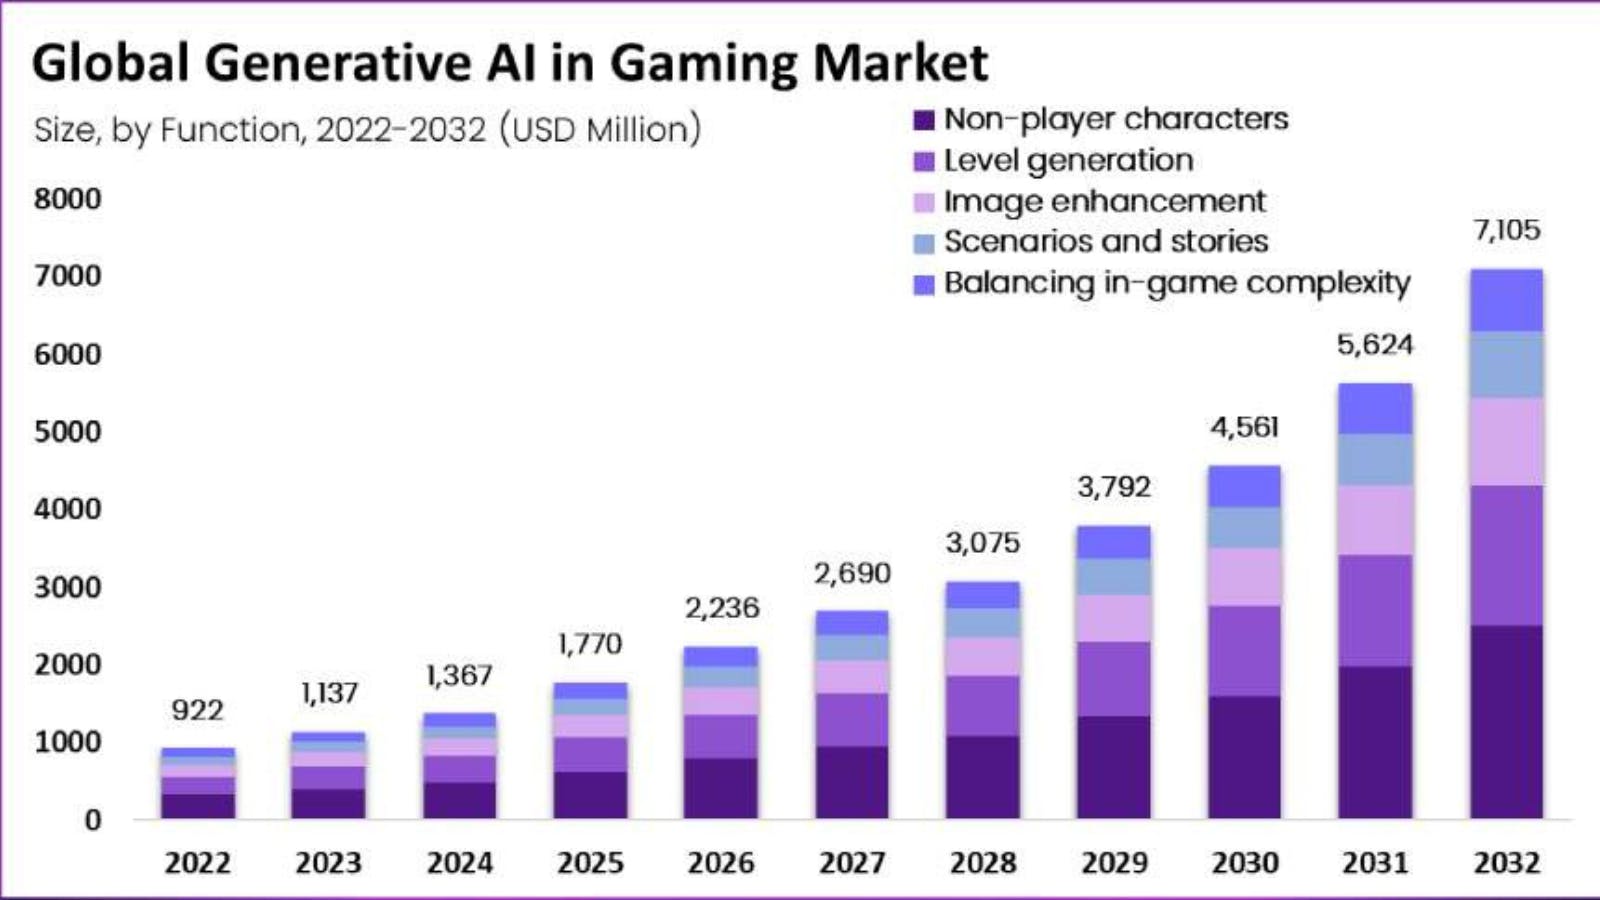 As reported by Market.us, the worldwide market size for Generative AI in Gaming reached USD 922 million in 2022, and it is projected to experience a rapid growth rate with a CAGR of 23.3%. This expansion is anticipated to result in an additional revenue of USD 7,105 million by the year 2032.